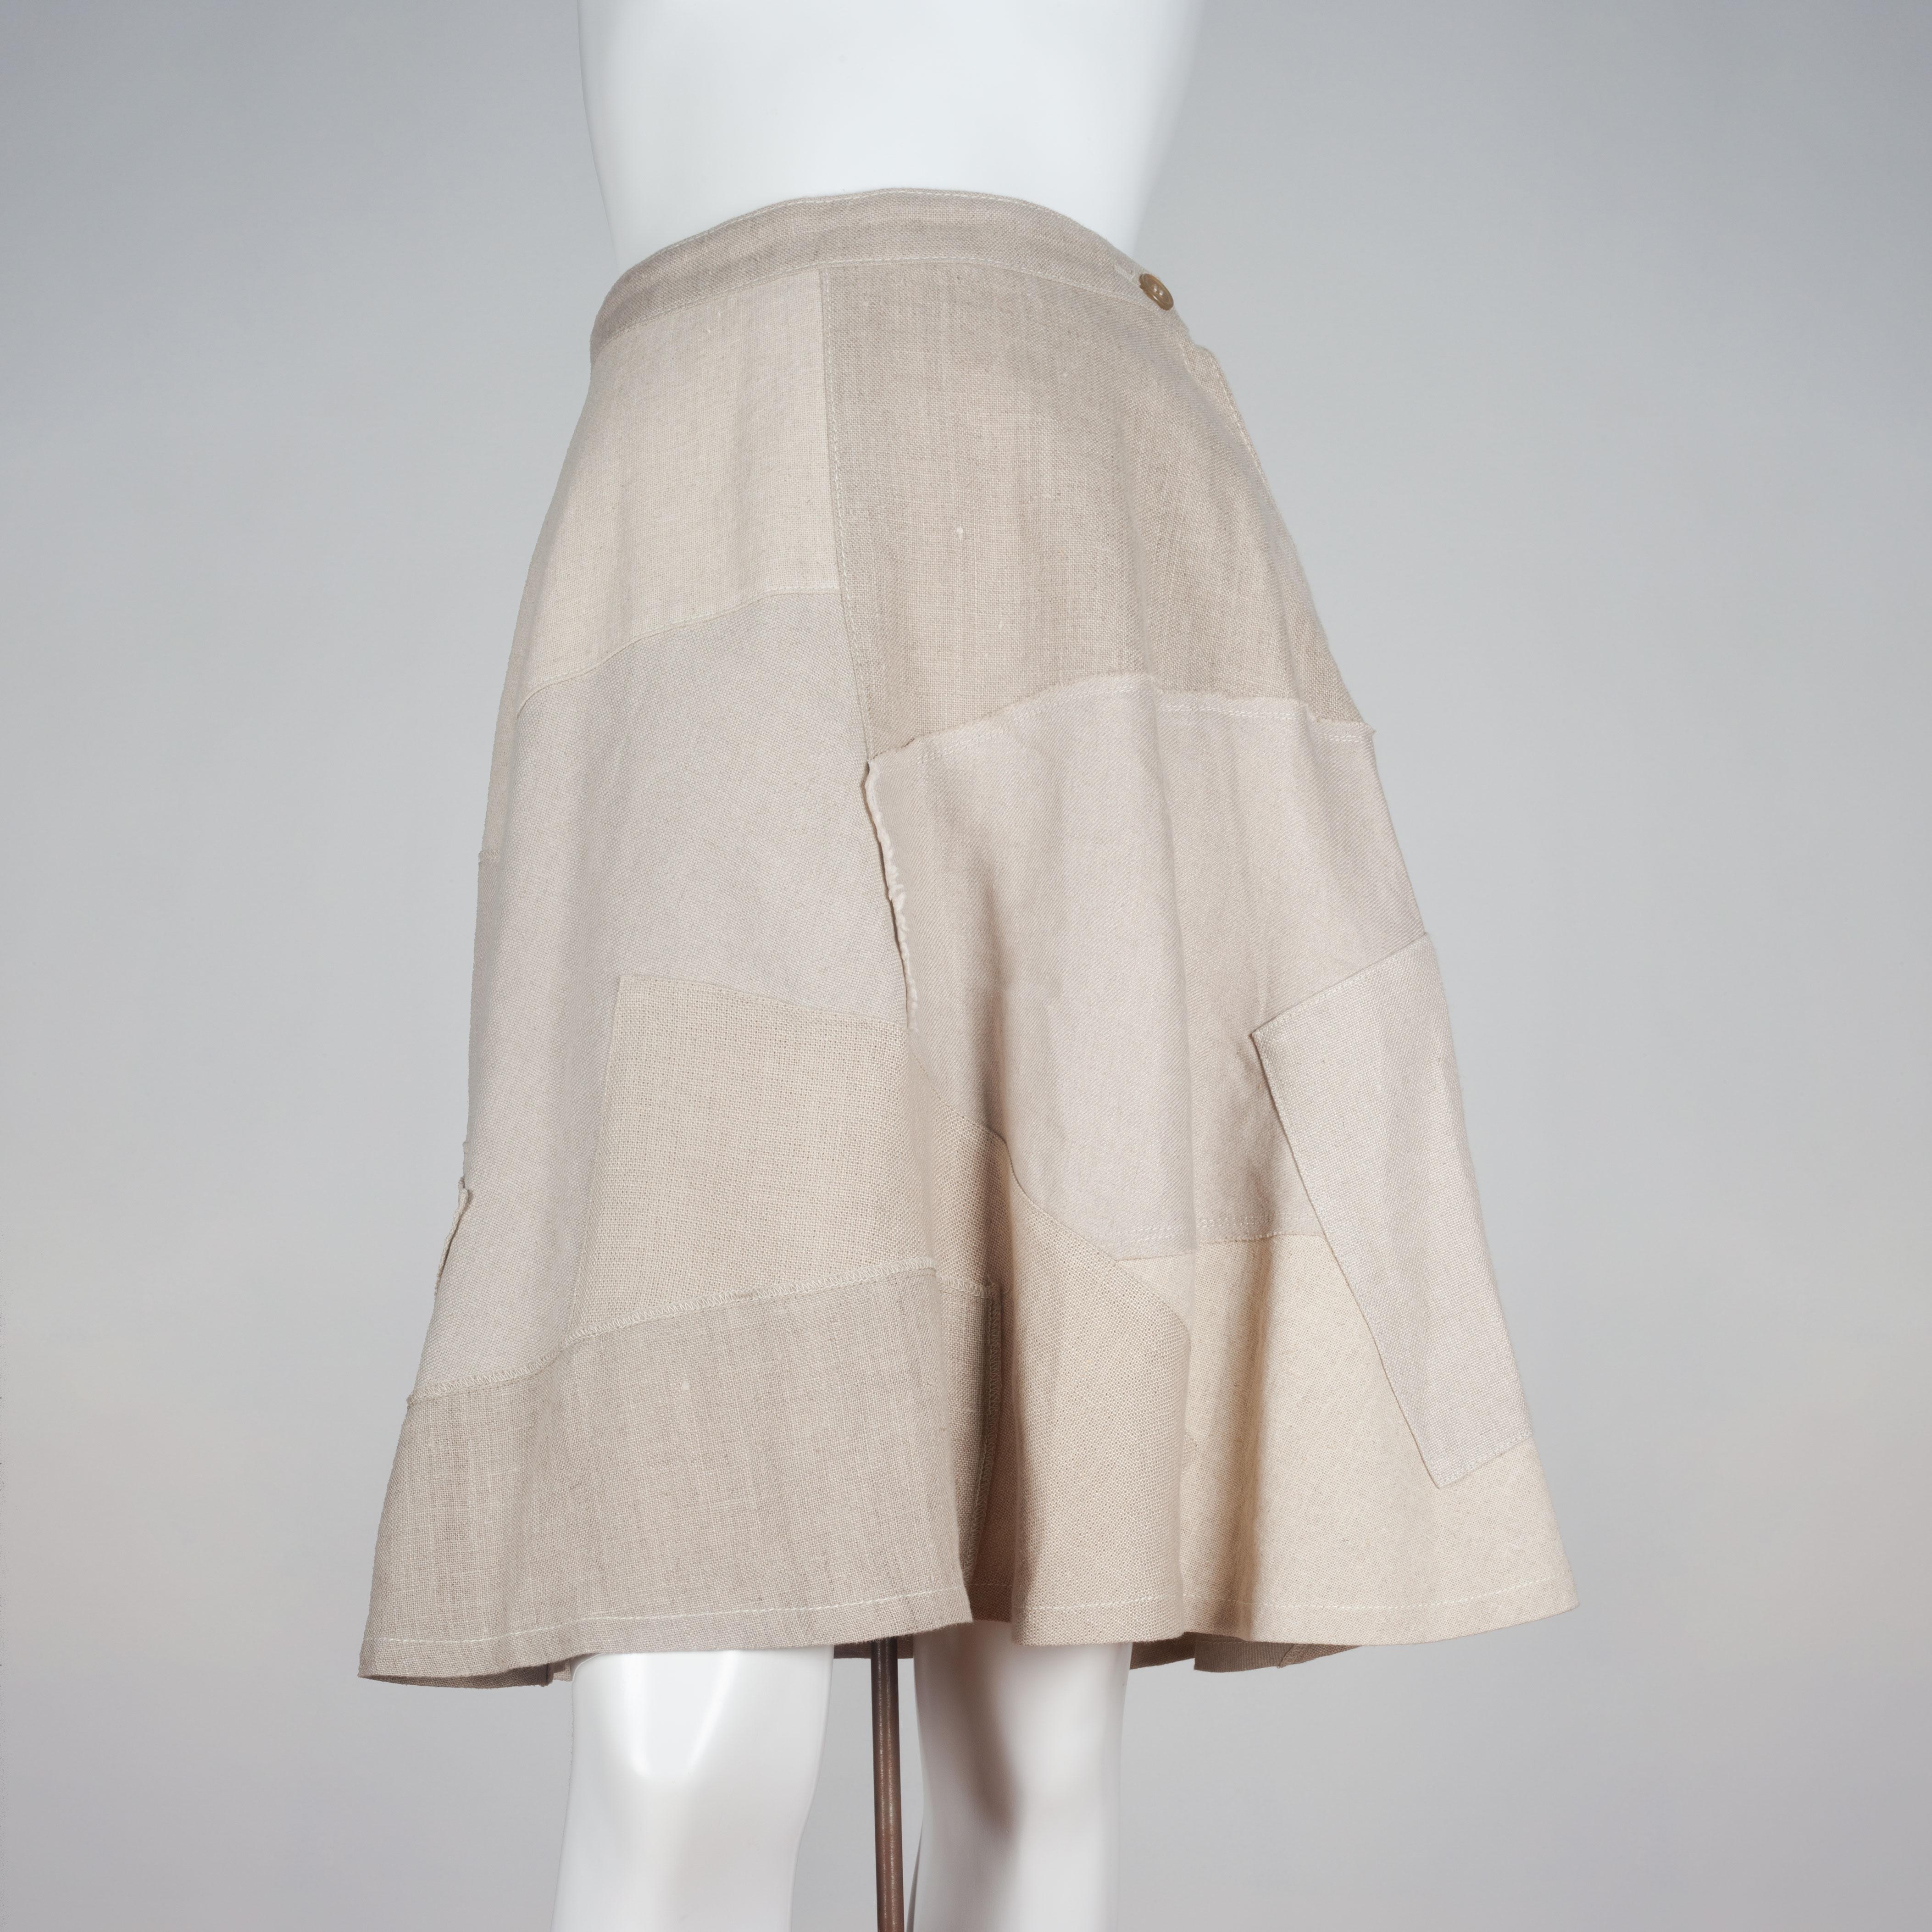 Junya Watanabe Comme des Garçons 2013, a patchwork skirt from Japan composed of neutral tones in patchwork linen and an A-line cut. Bohemian feel with a classic cut and deconstructed style. 

YEAR: 2013
MARKED SIZE: XS
US WOMEN'S: XS
US MEN'S: